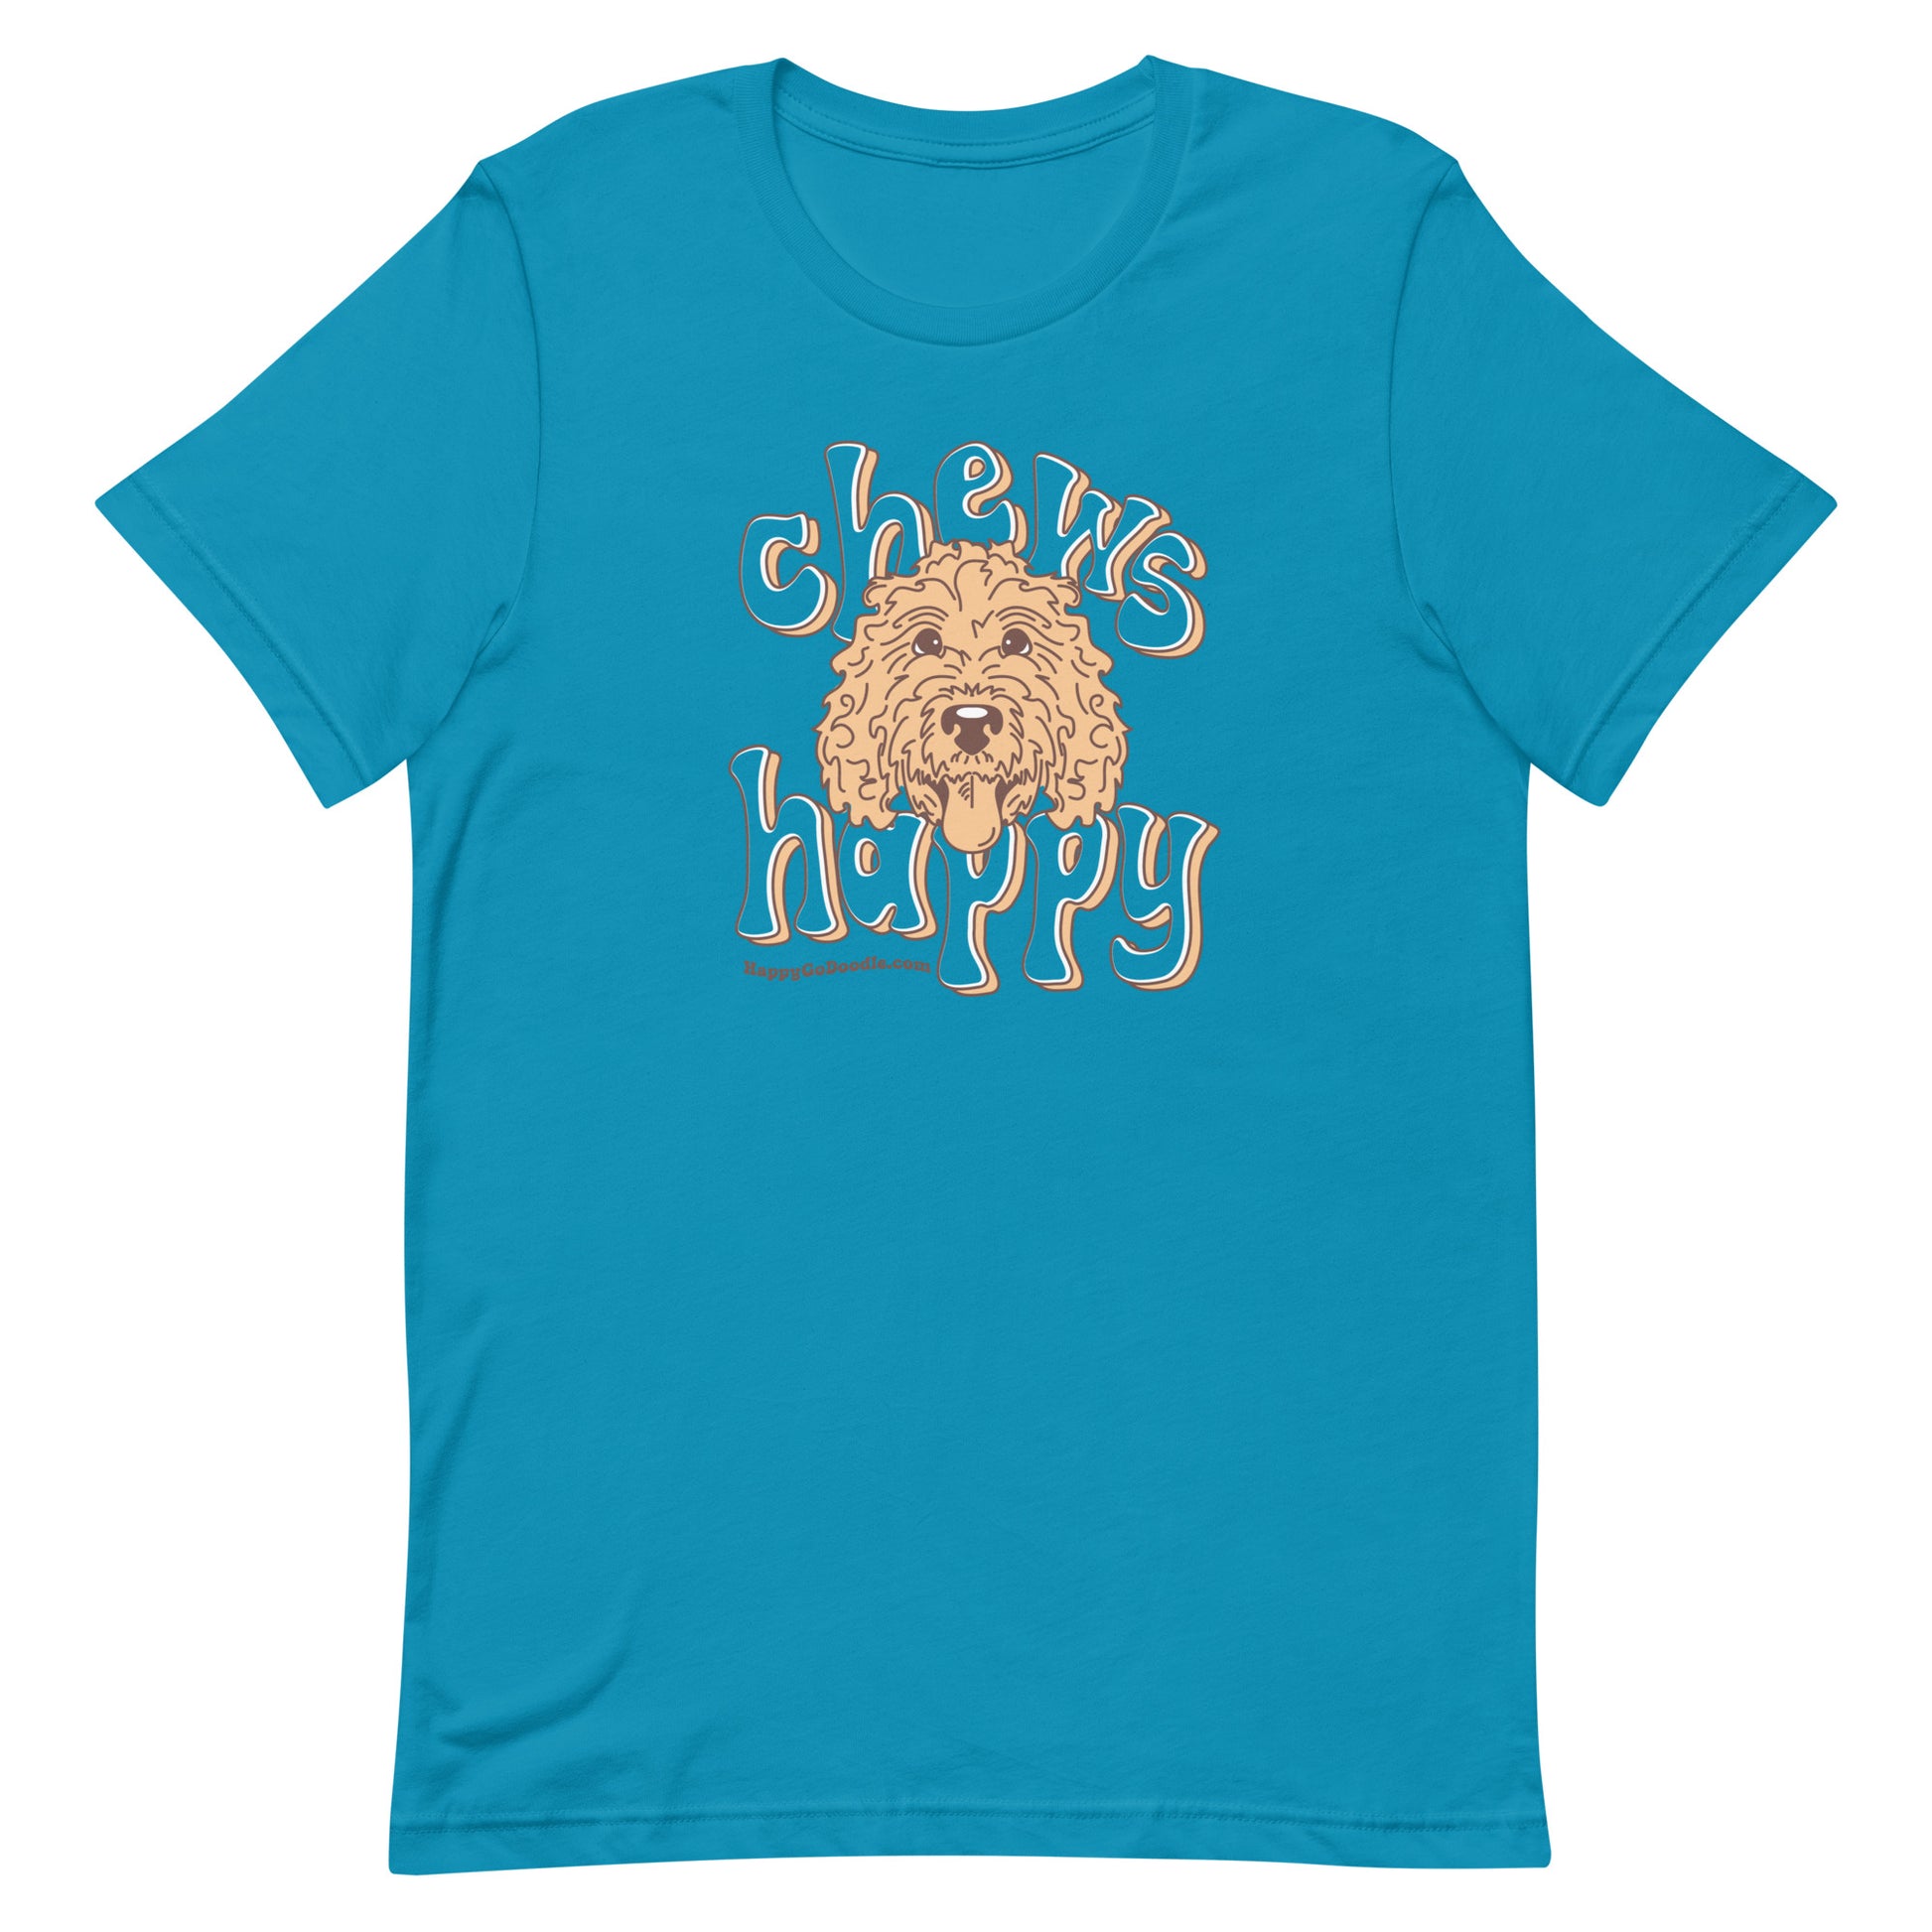 Goldendoodle crew neck sweatshirt with Goldendoodle face and words "Chews Happy" in aqua color